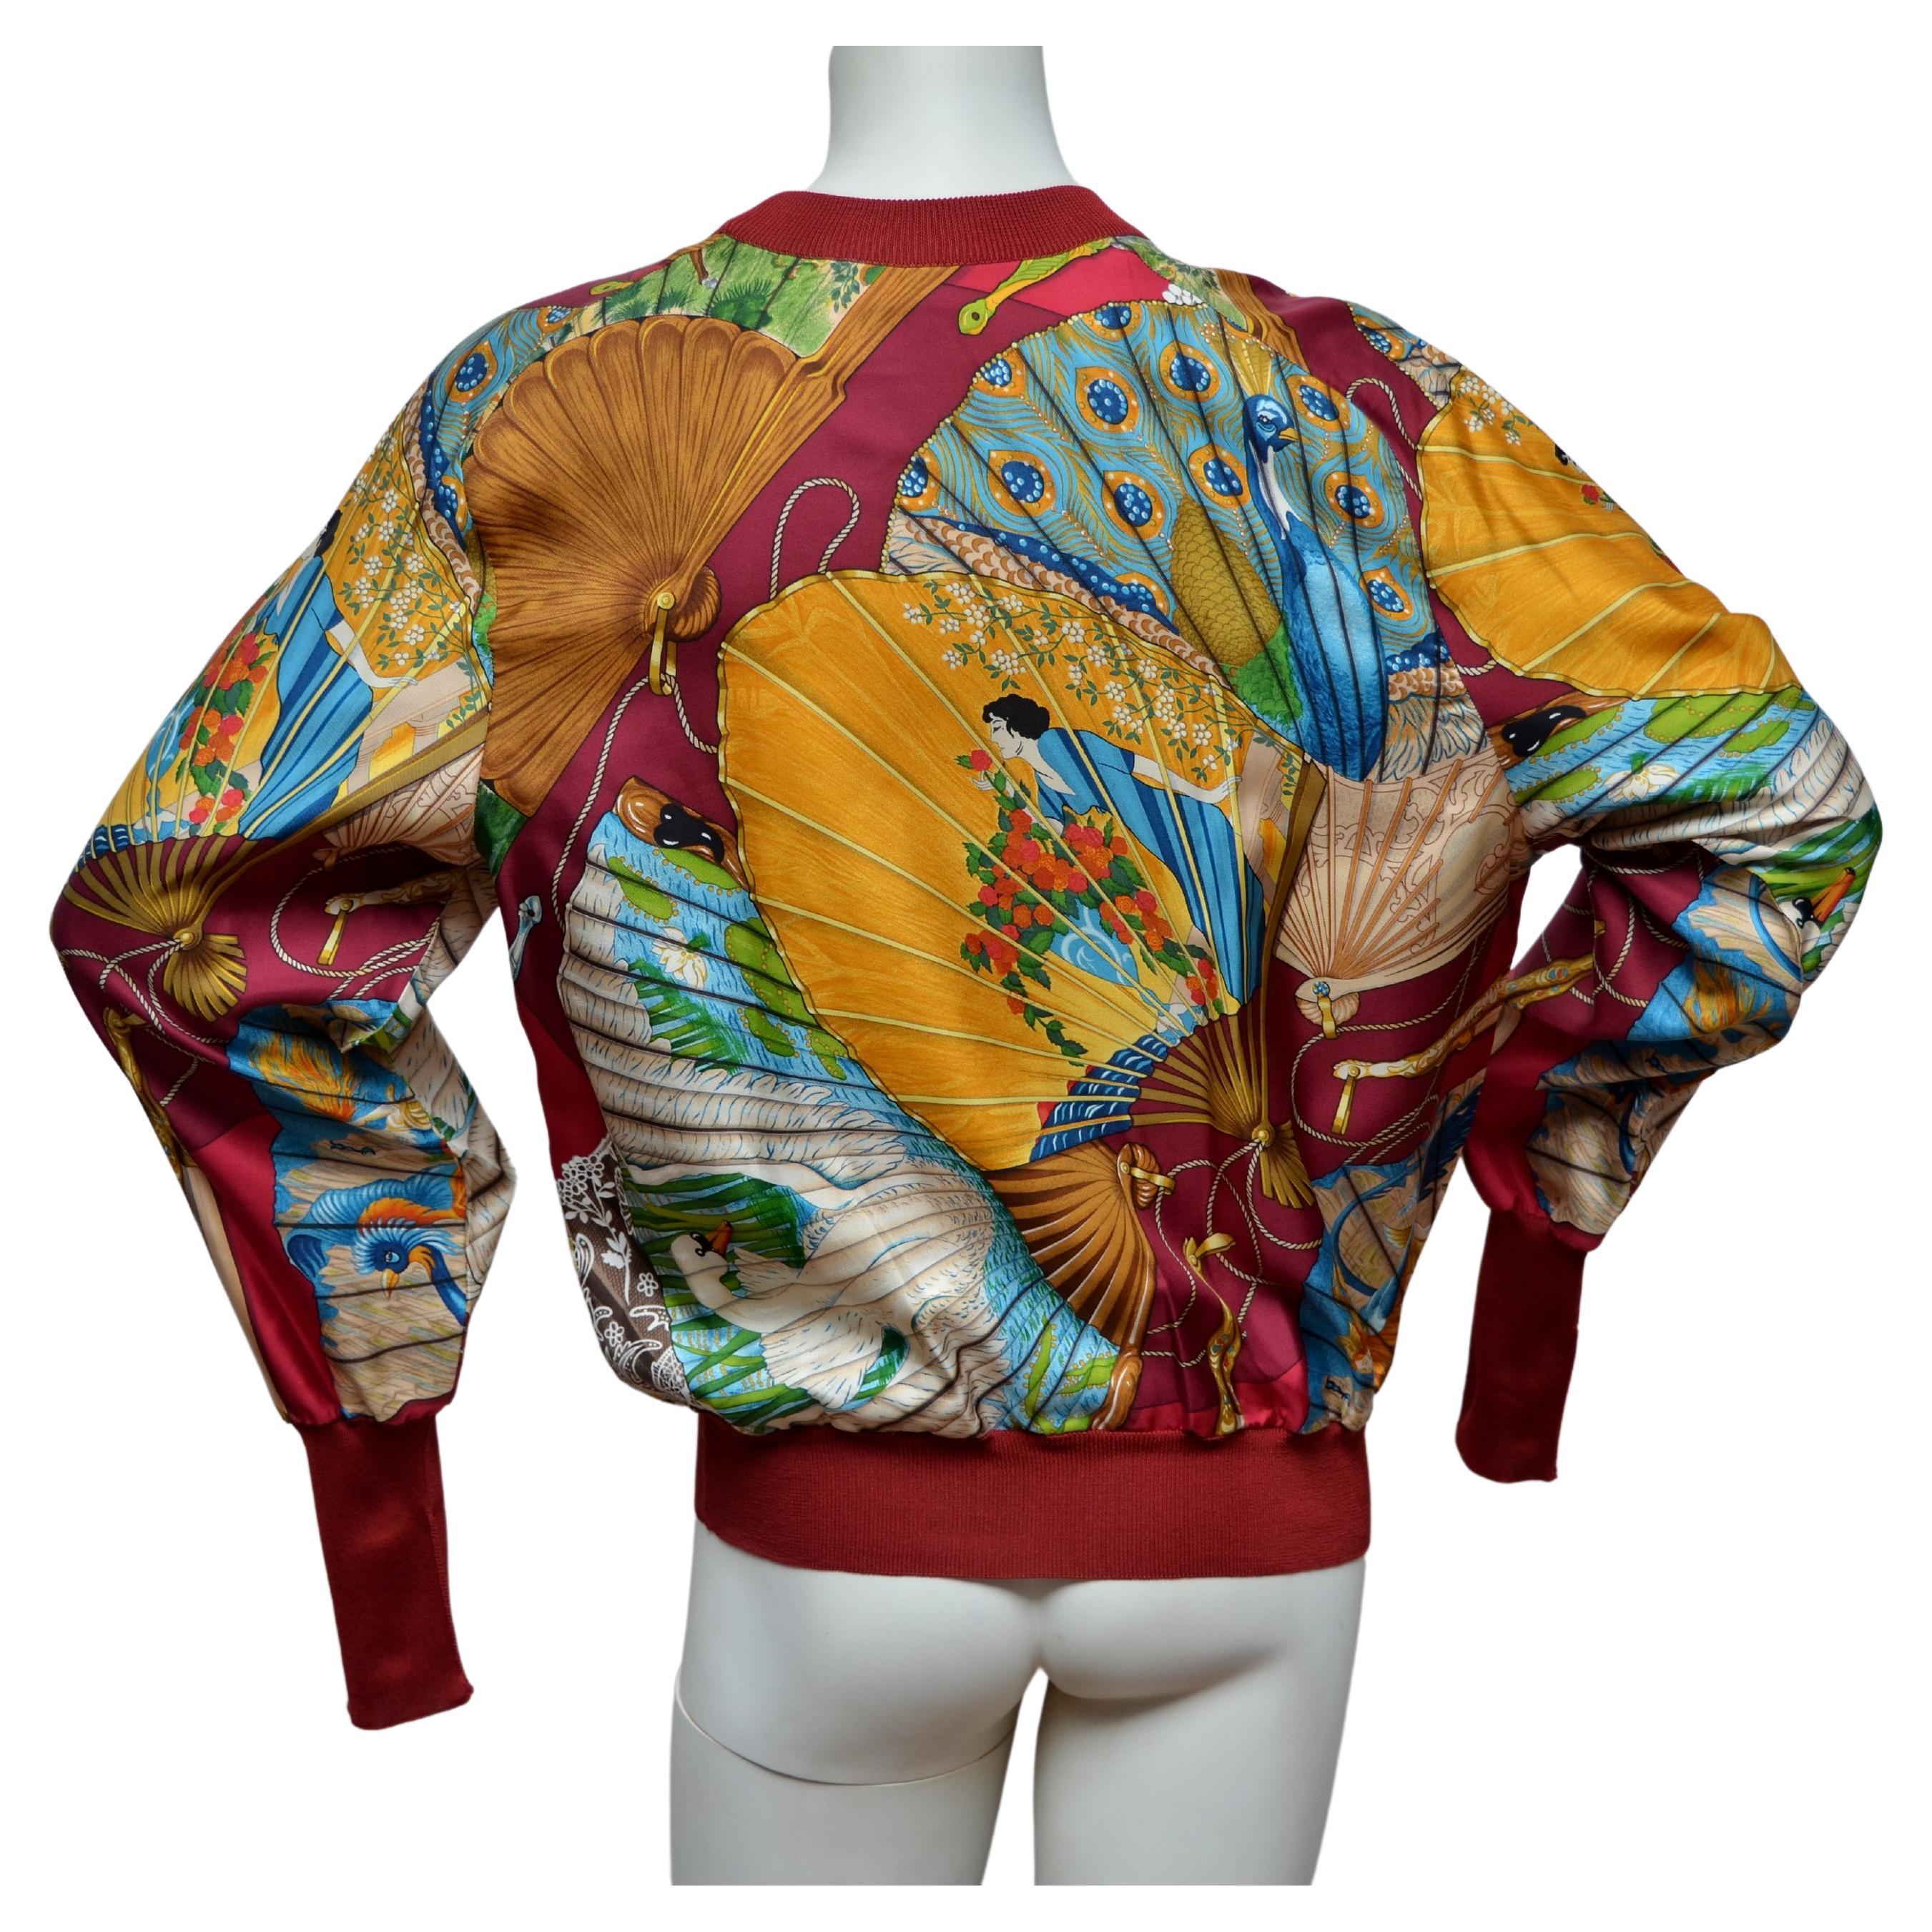 Hermes 100% silk vintage sweatshirt 
Multicolor with peacock and swan print.
Fabric looks new and unworn.
Size 38 Fr.Made in France
FINAL SALE